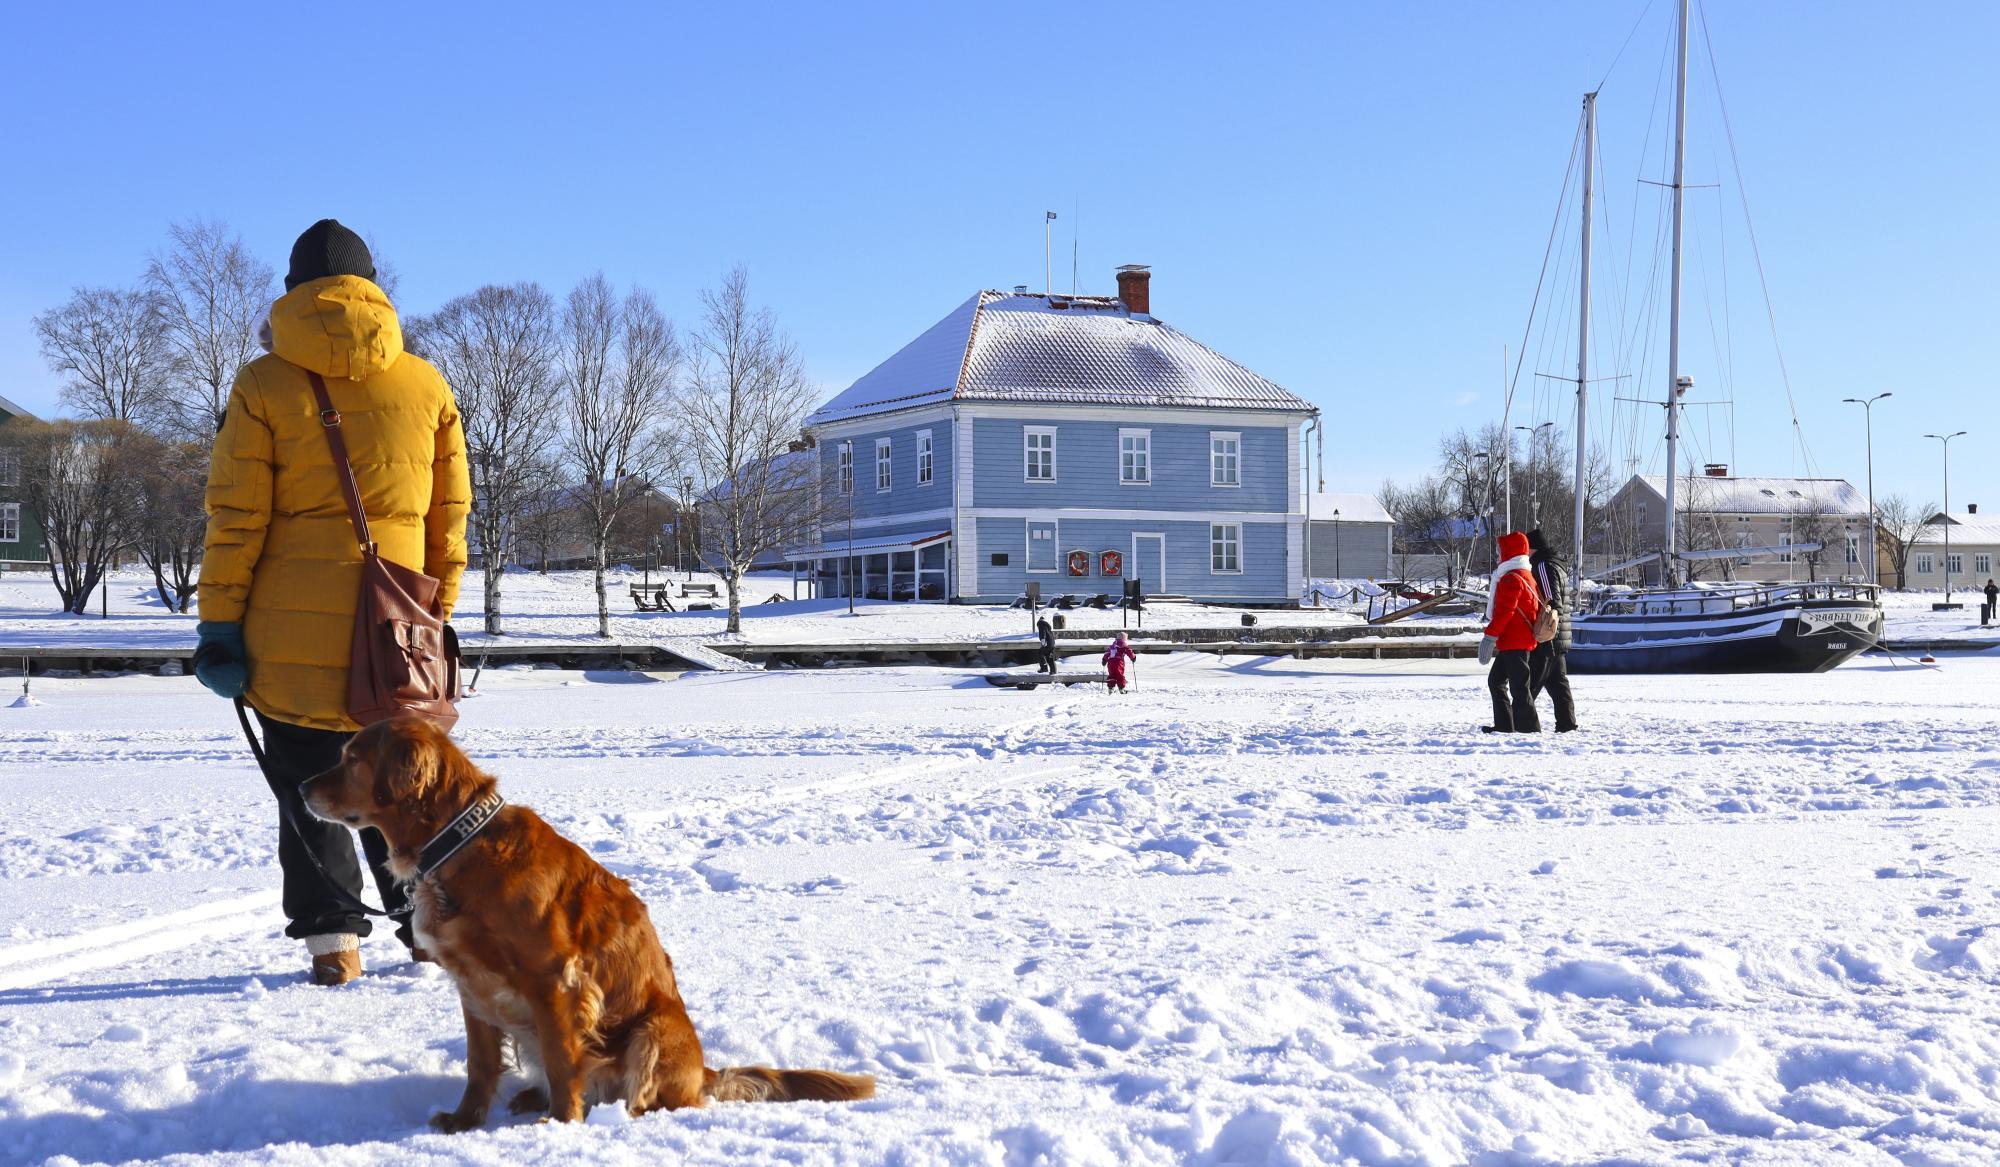 People, a dog and a ship in a snowy landscape. Trees and old buildings in the background.